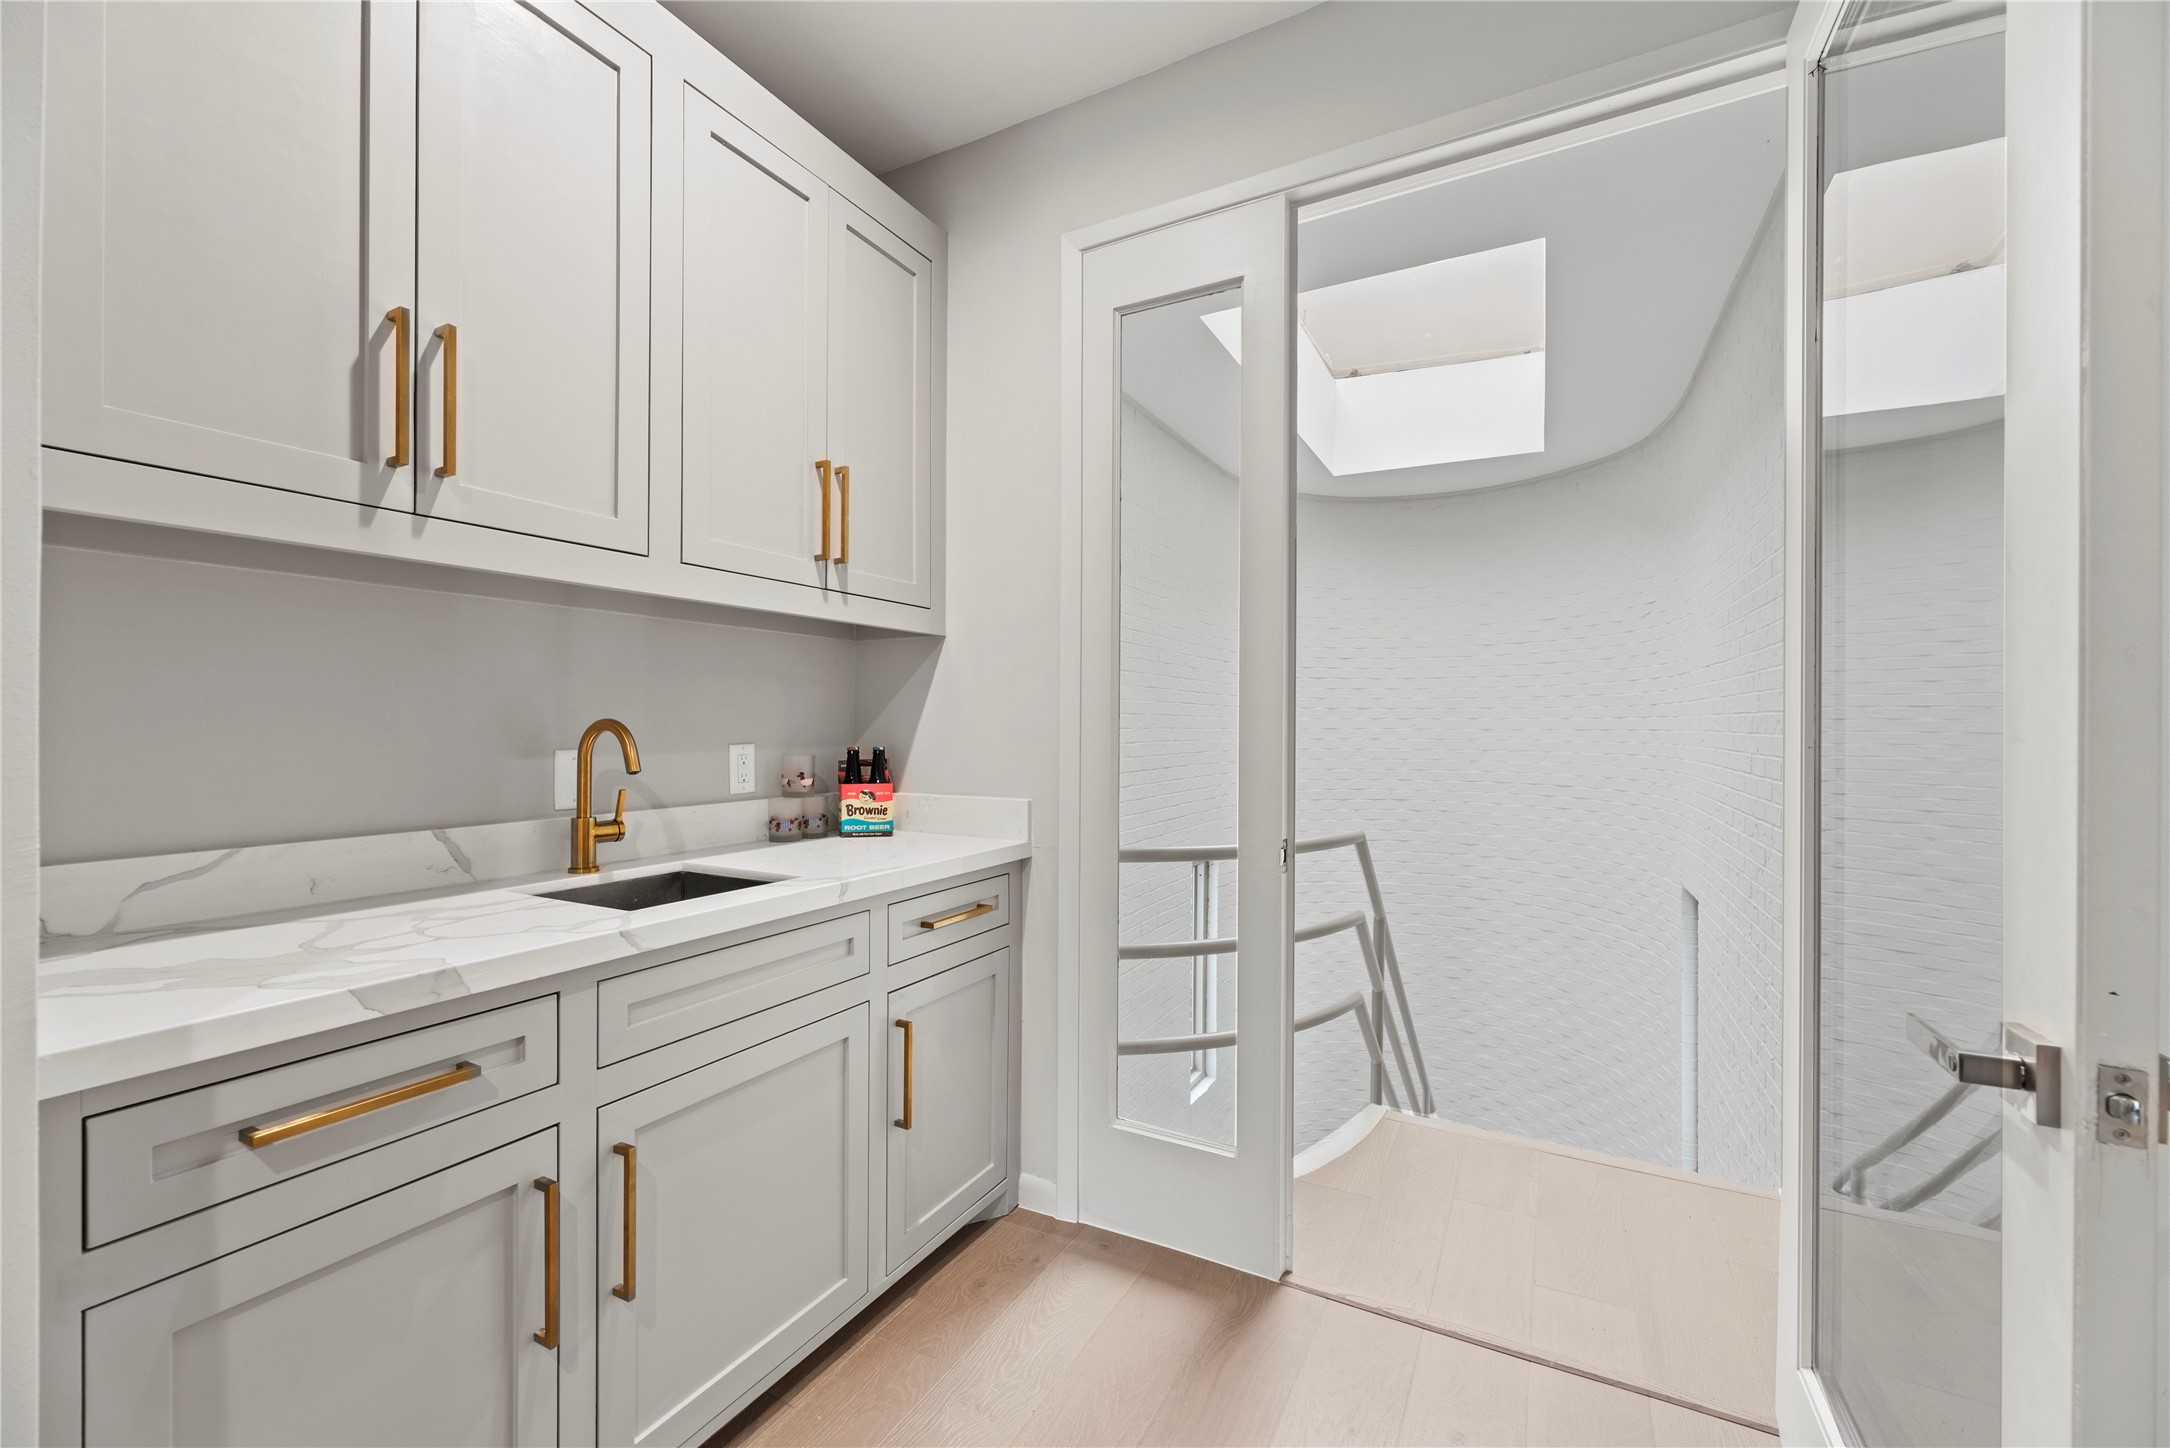 A small kitchenette area is in the 3rd floor guest apartment/guest suite with separate entrance.